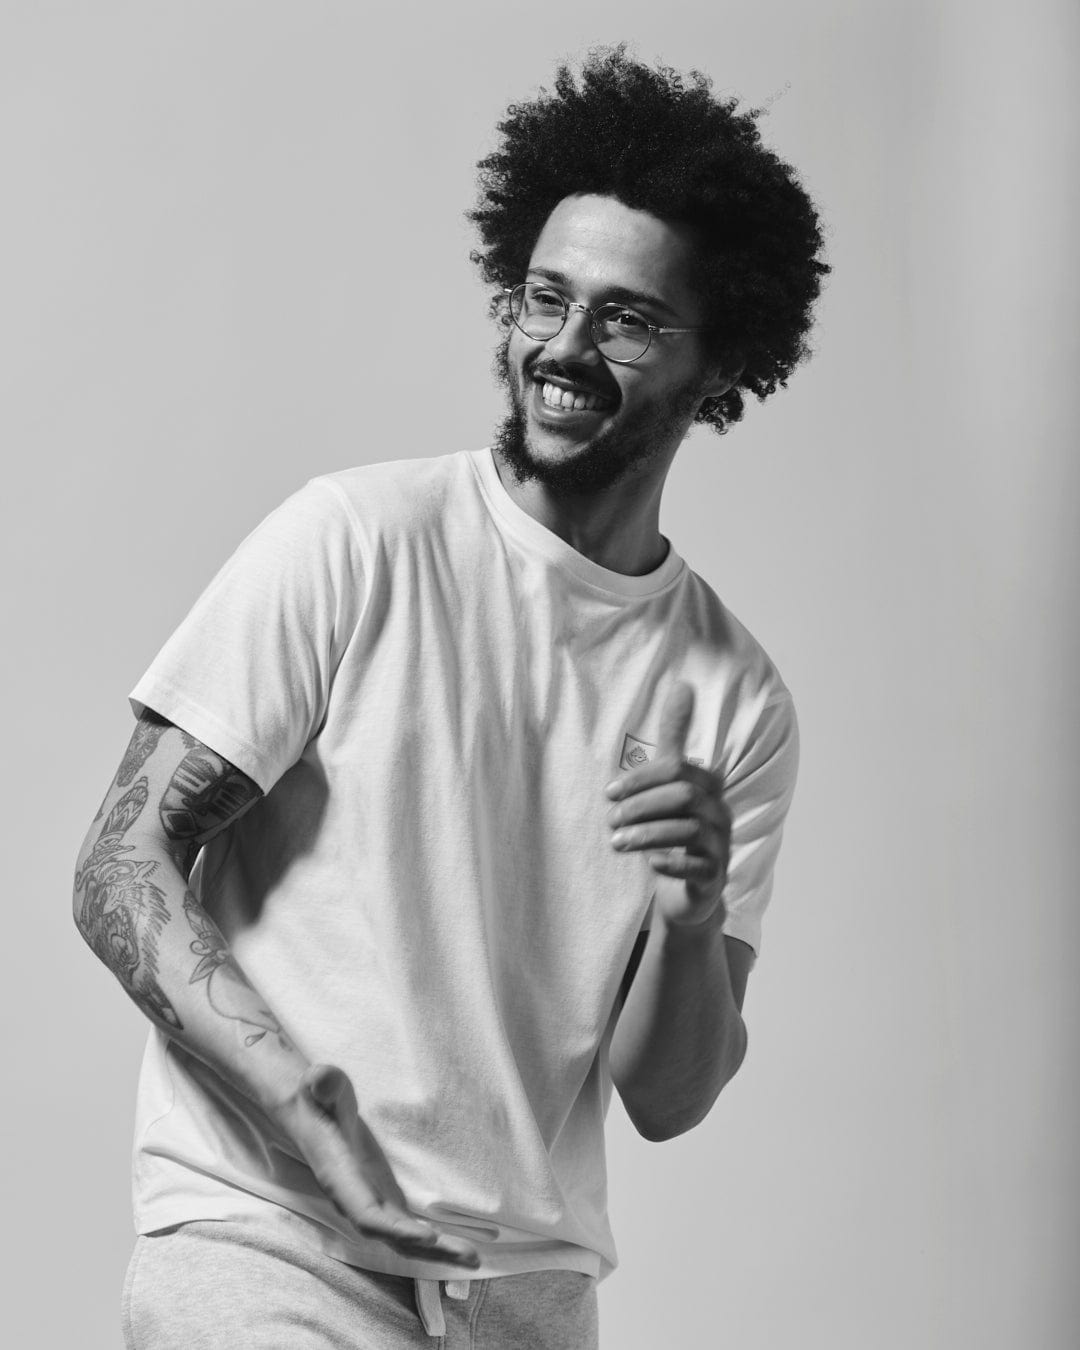 A black and white photo of a man with afro hair and tattoos wearing a Saltrock - Mens Short Sleeve T-Shirt - Light Blue.